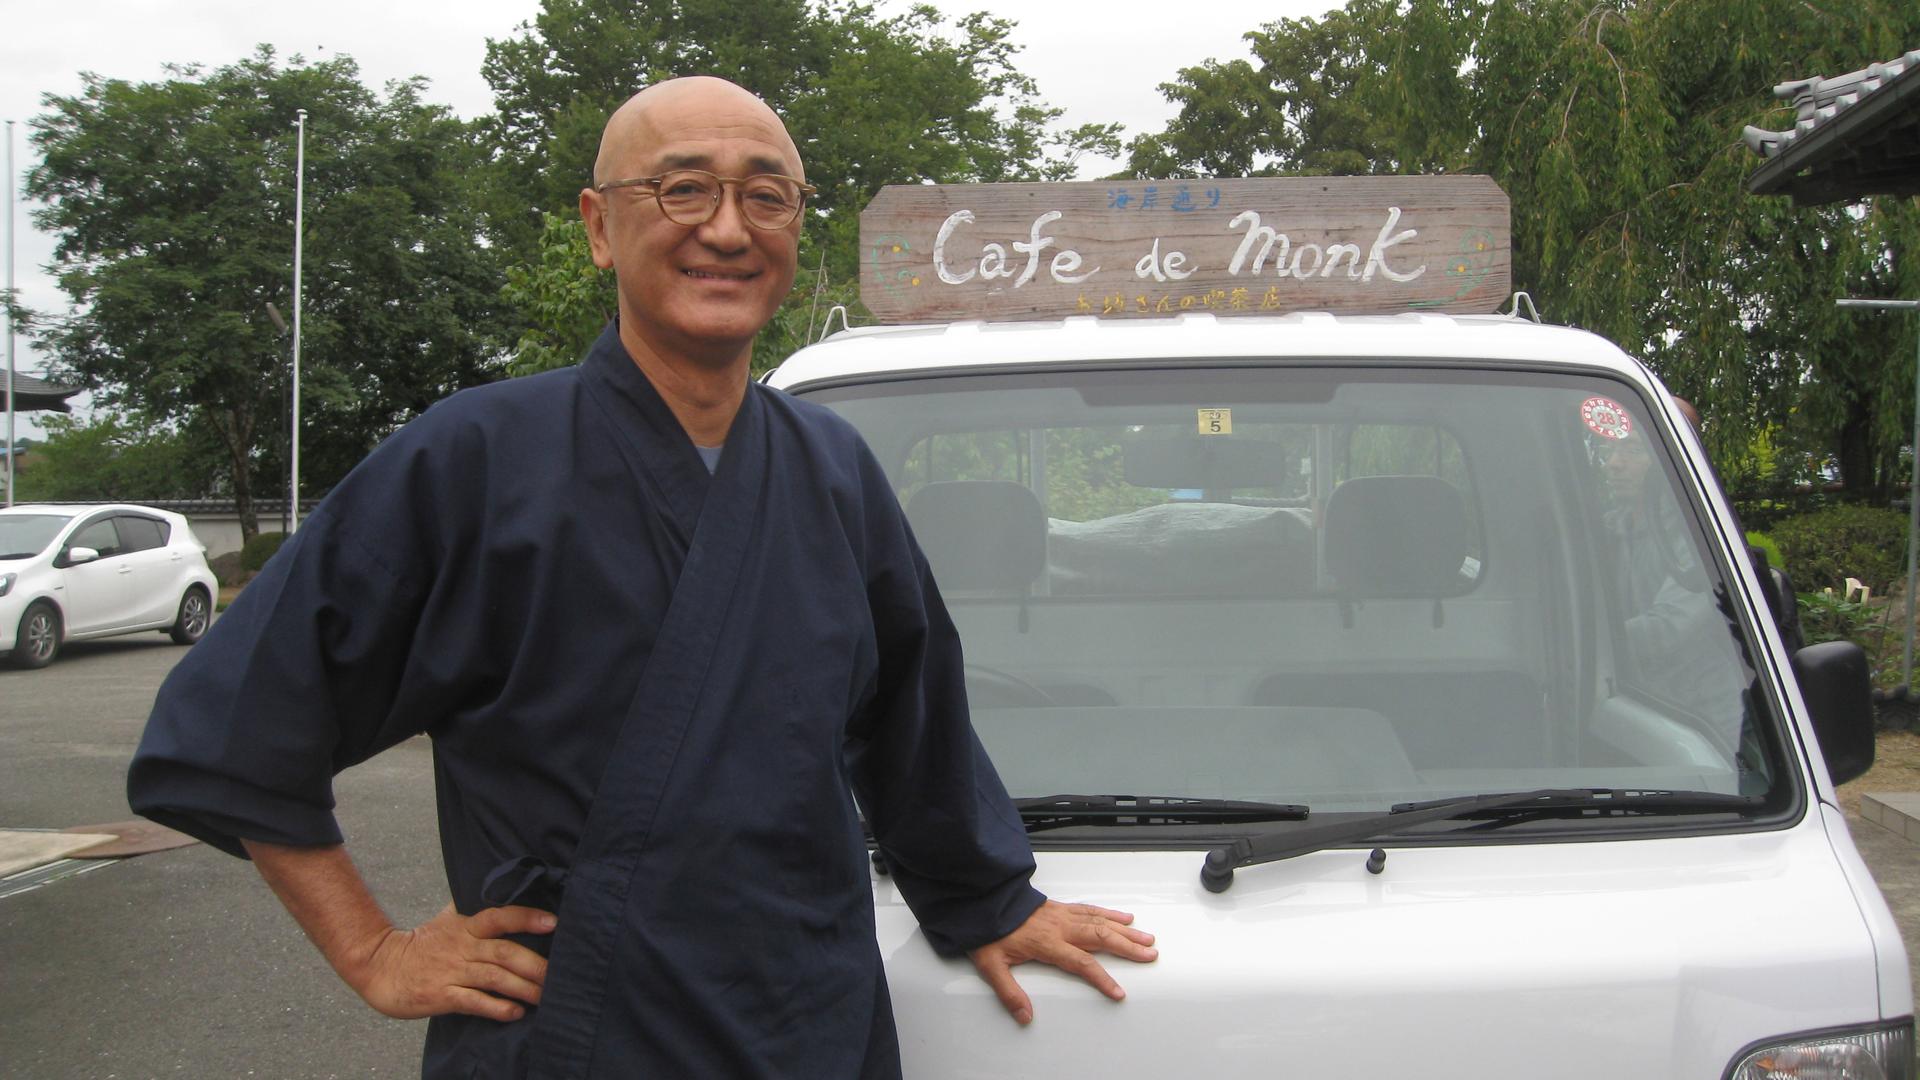 Taio Kaneta with his signature "Cafe de Monk" truck that he uses for his pop-up cafes. As a Buddhist monk, Kaneta wanted to offer something special to those still reeling from the triple disaster of earthquake, tsunami and nuclear meltdown.